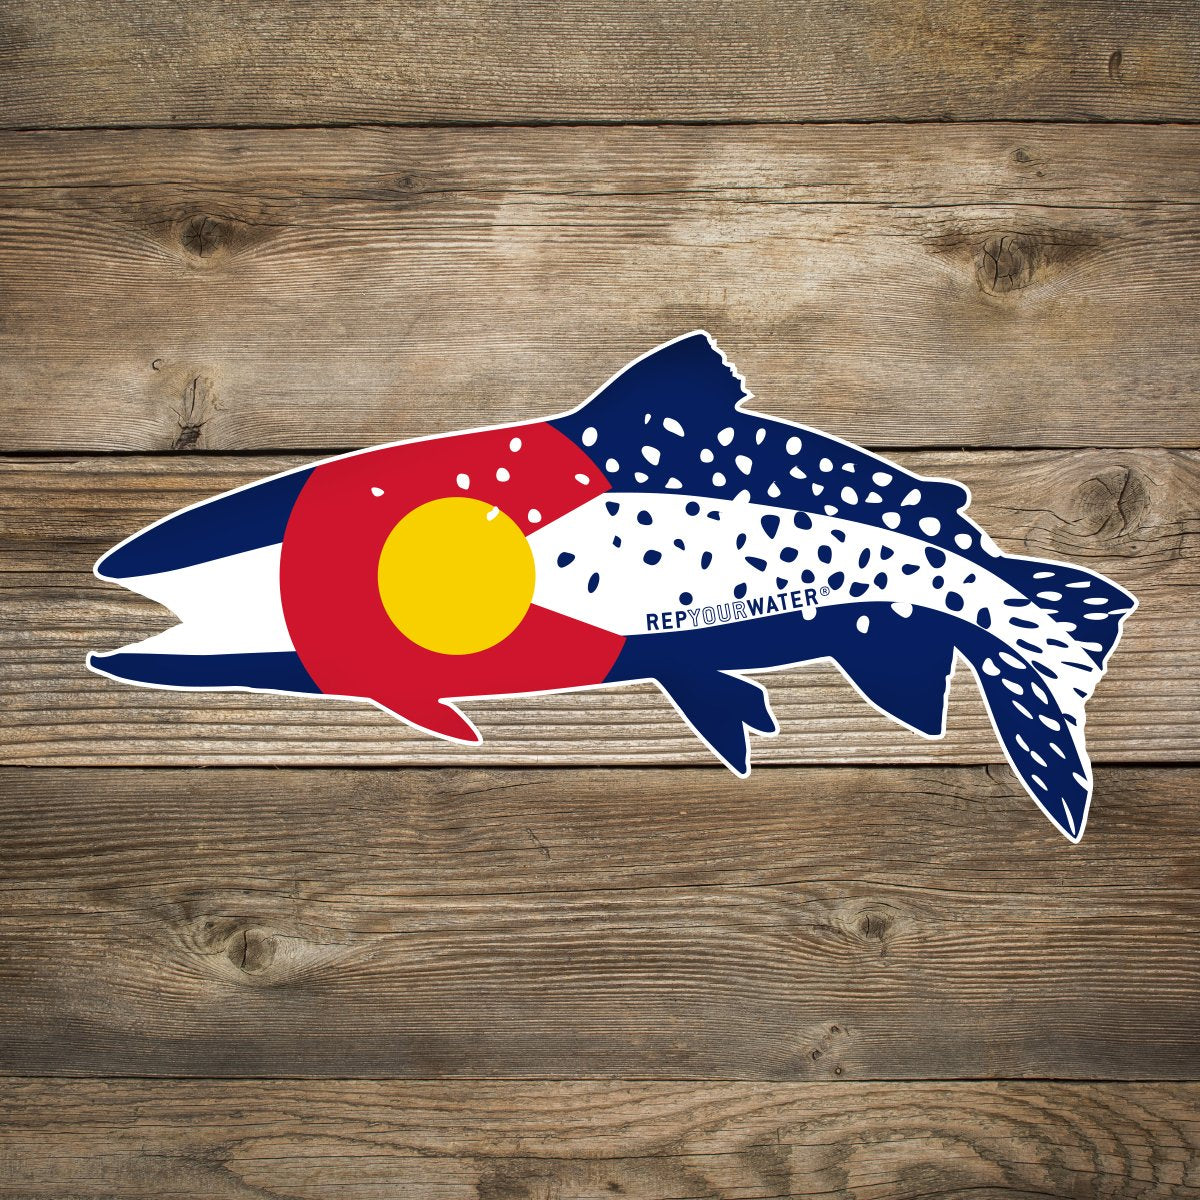 Rep Your Water Colorado Clarkii Sticker - Large